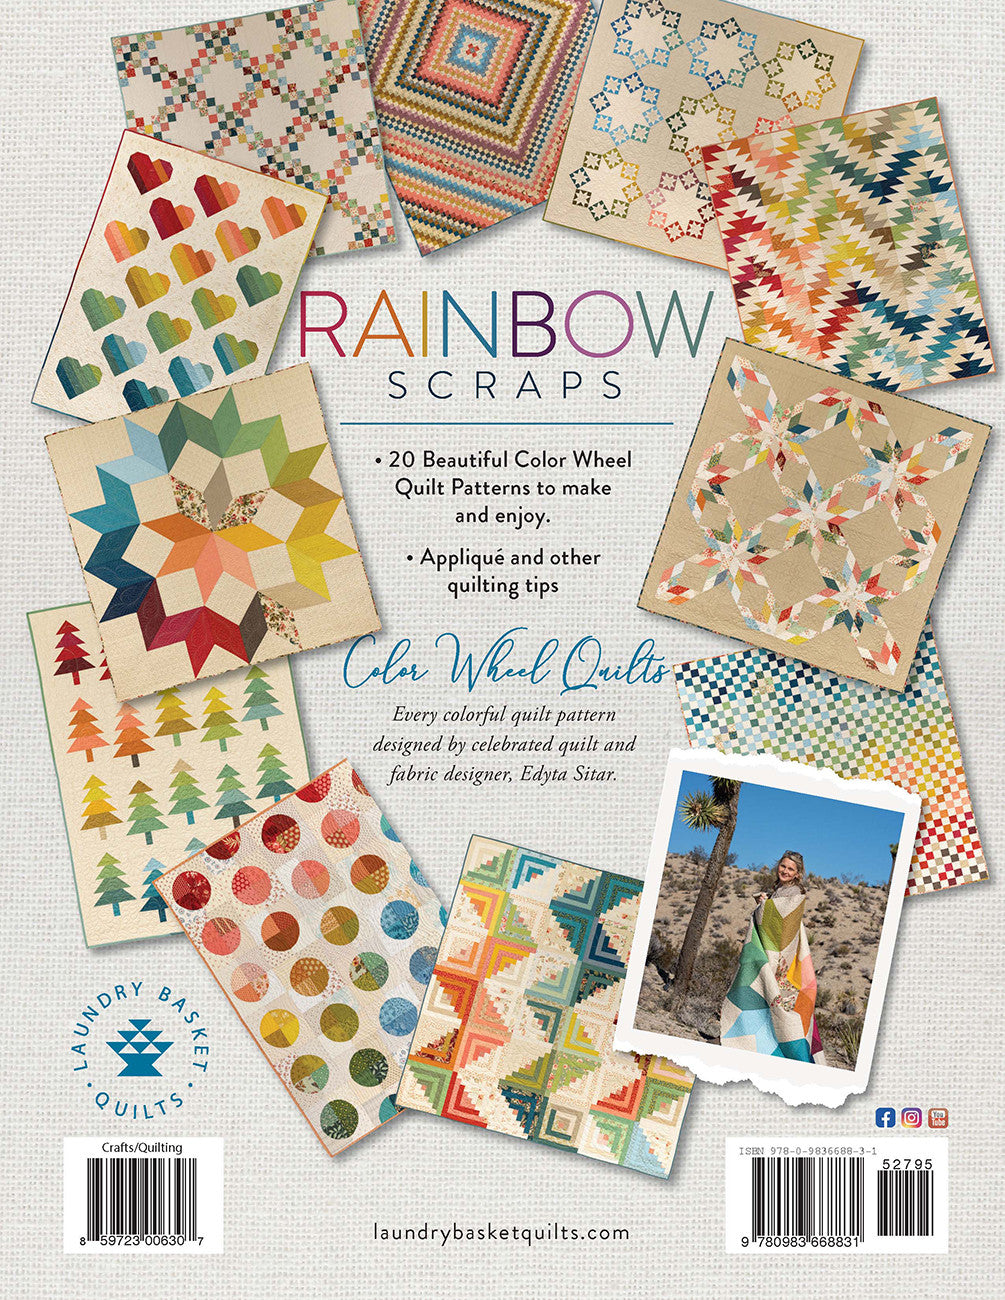 Rainbow Scraps Quilt Book by Edyta Sitar of Laundry Basket Quilts